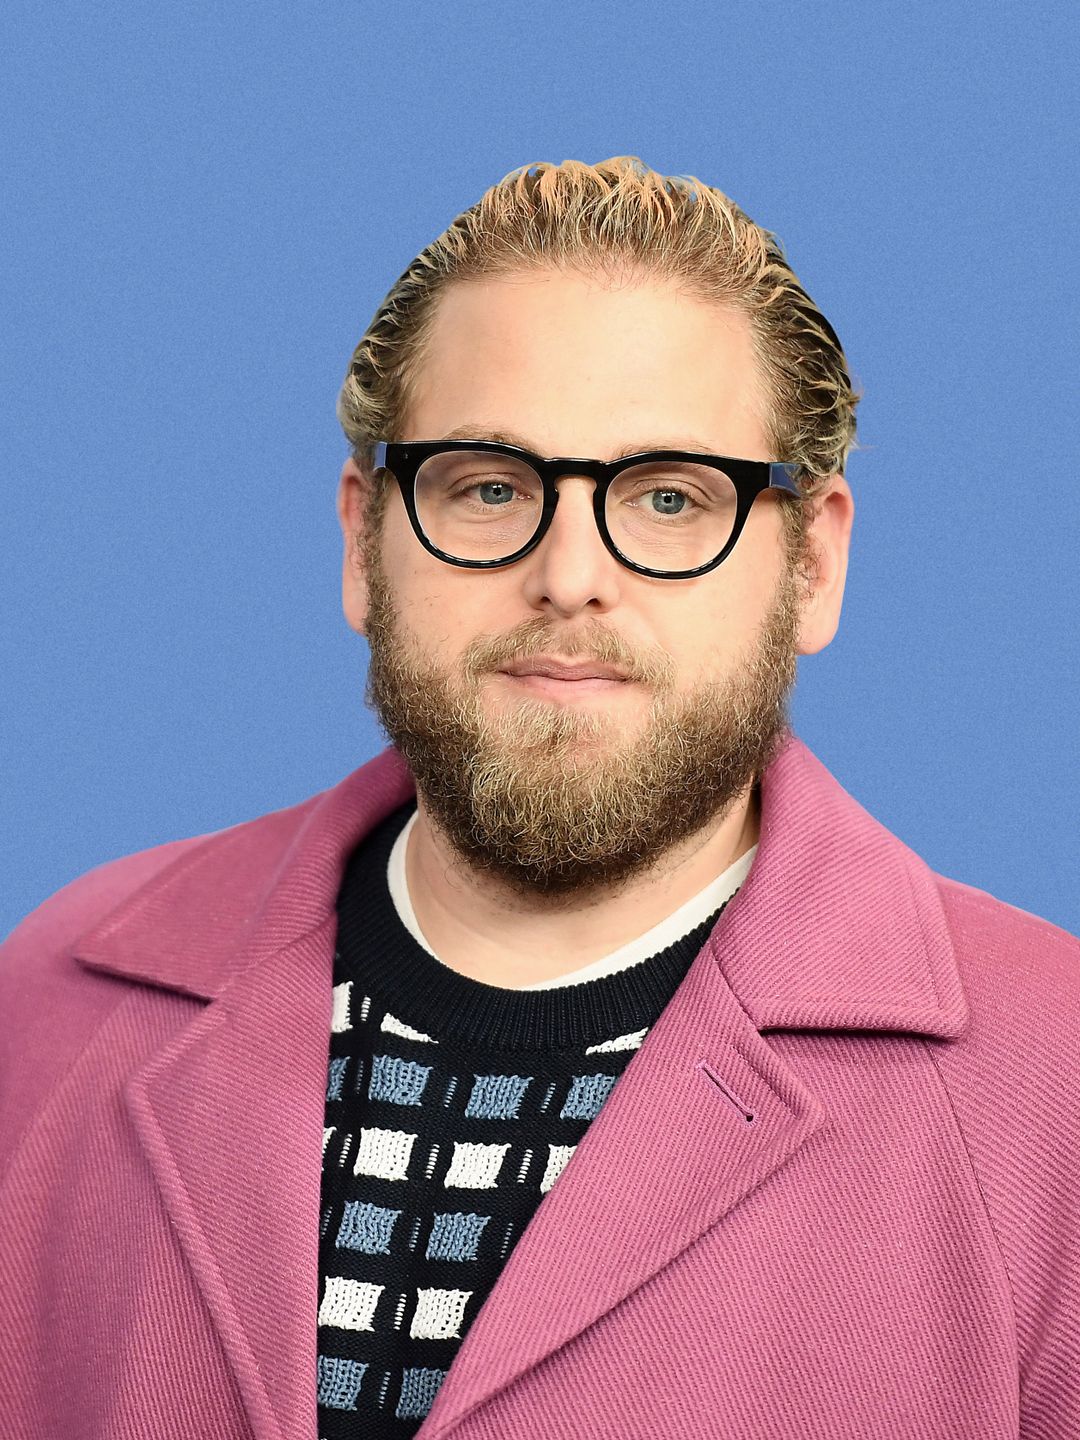 Jonah Hill who are his parents